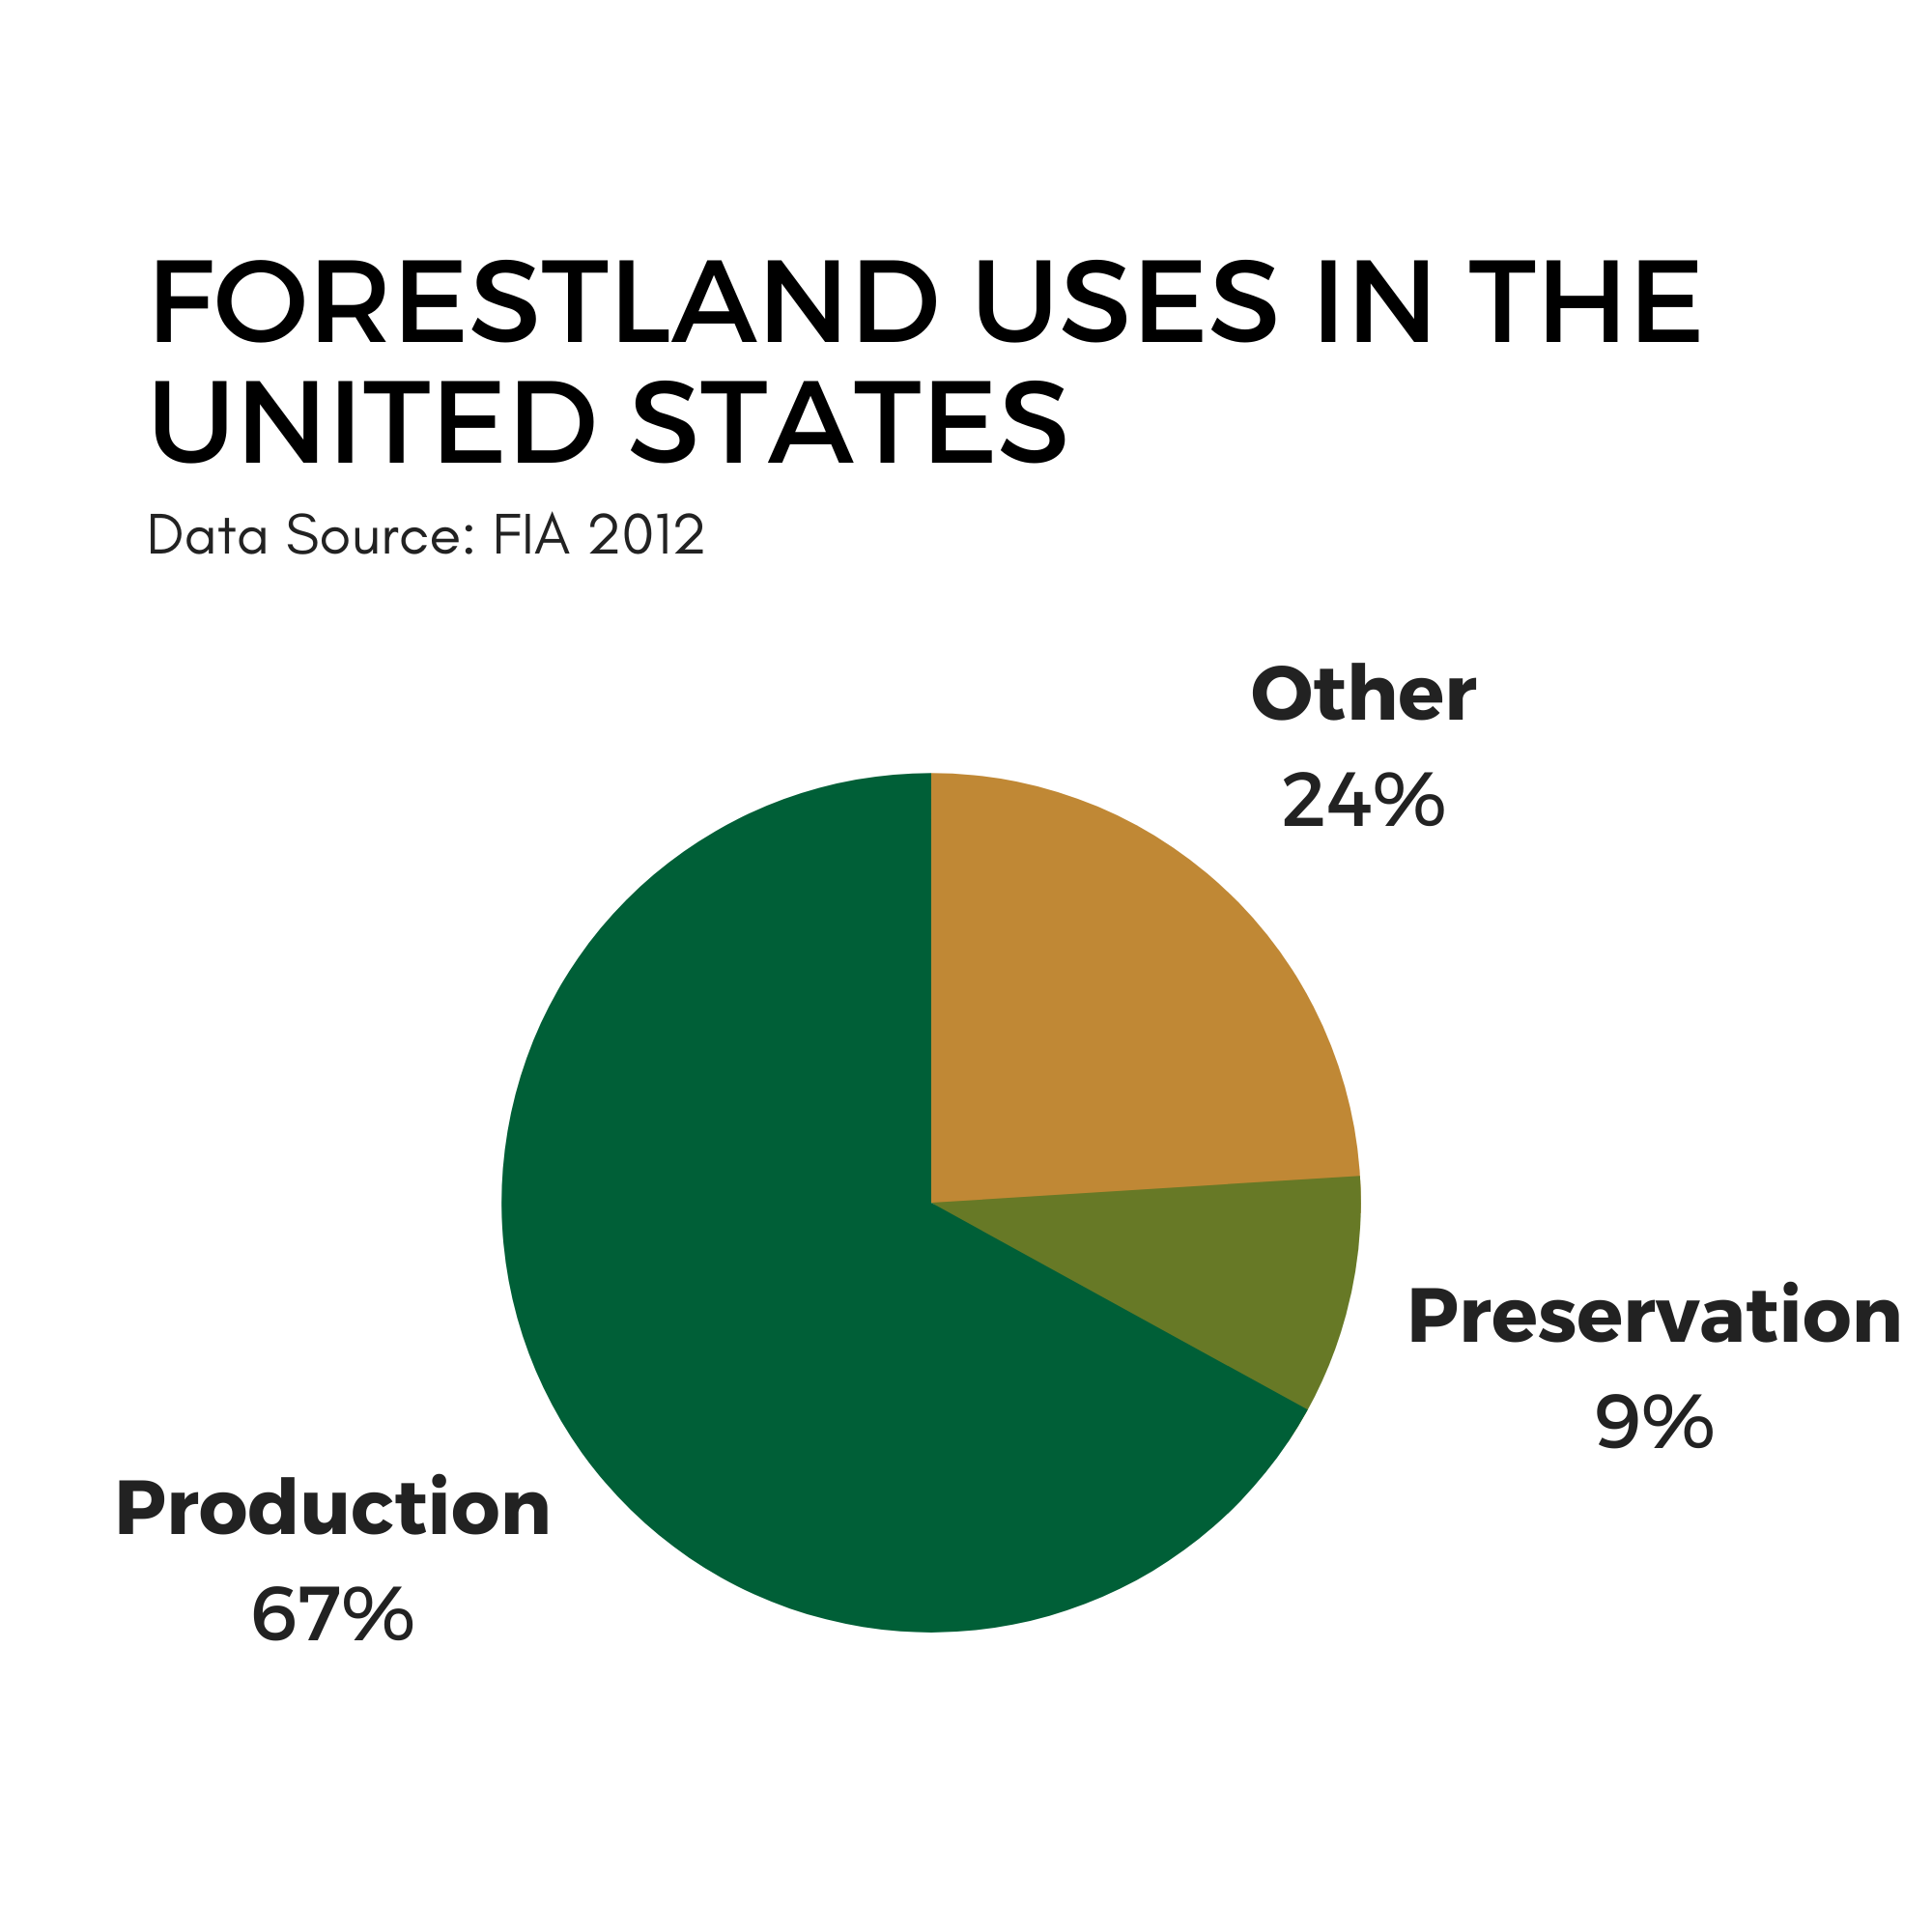 Pie chart depicting U.S. forest uses